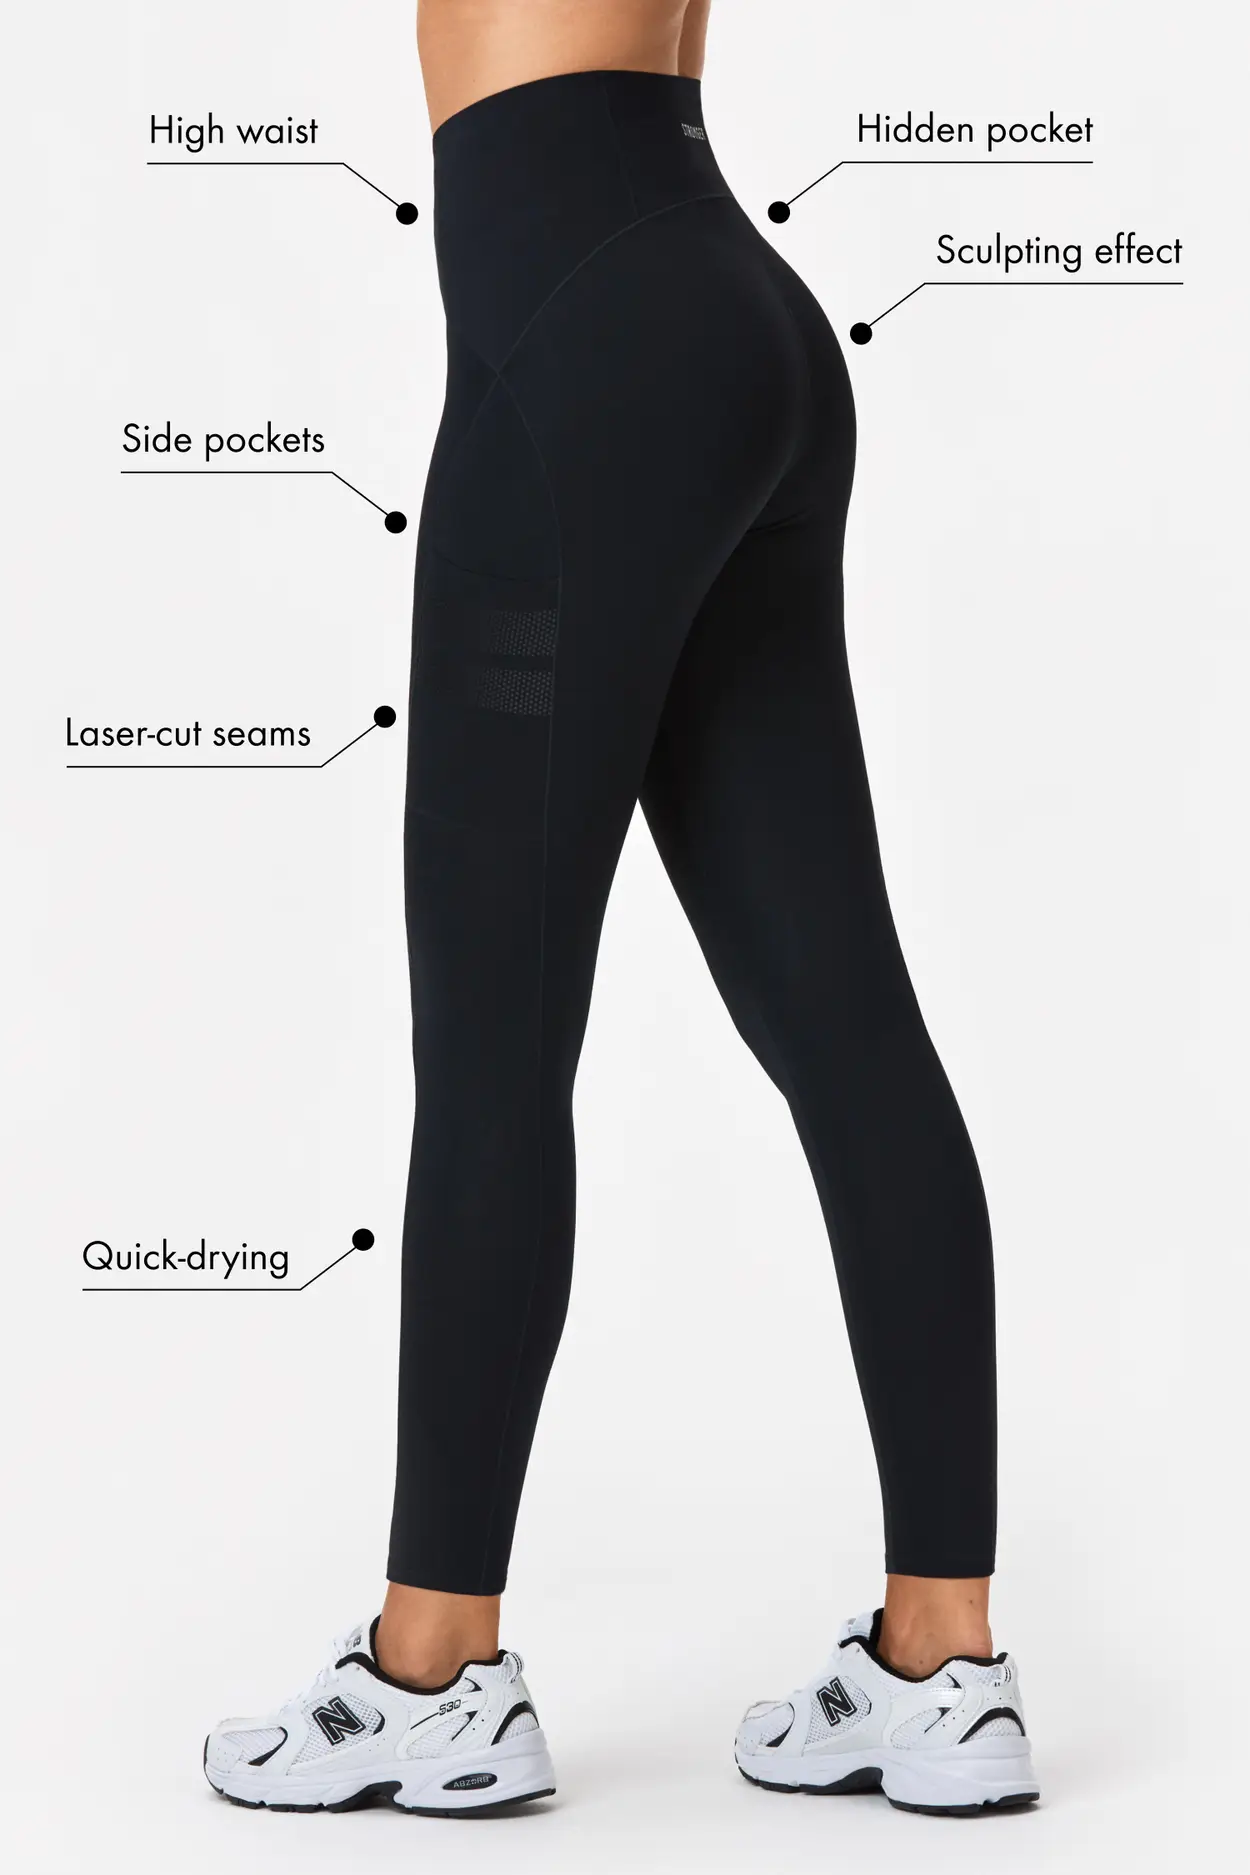 Elevated Seaming Sculpting Leggings w/ Pockets Comfortable